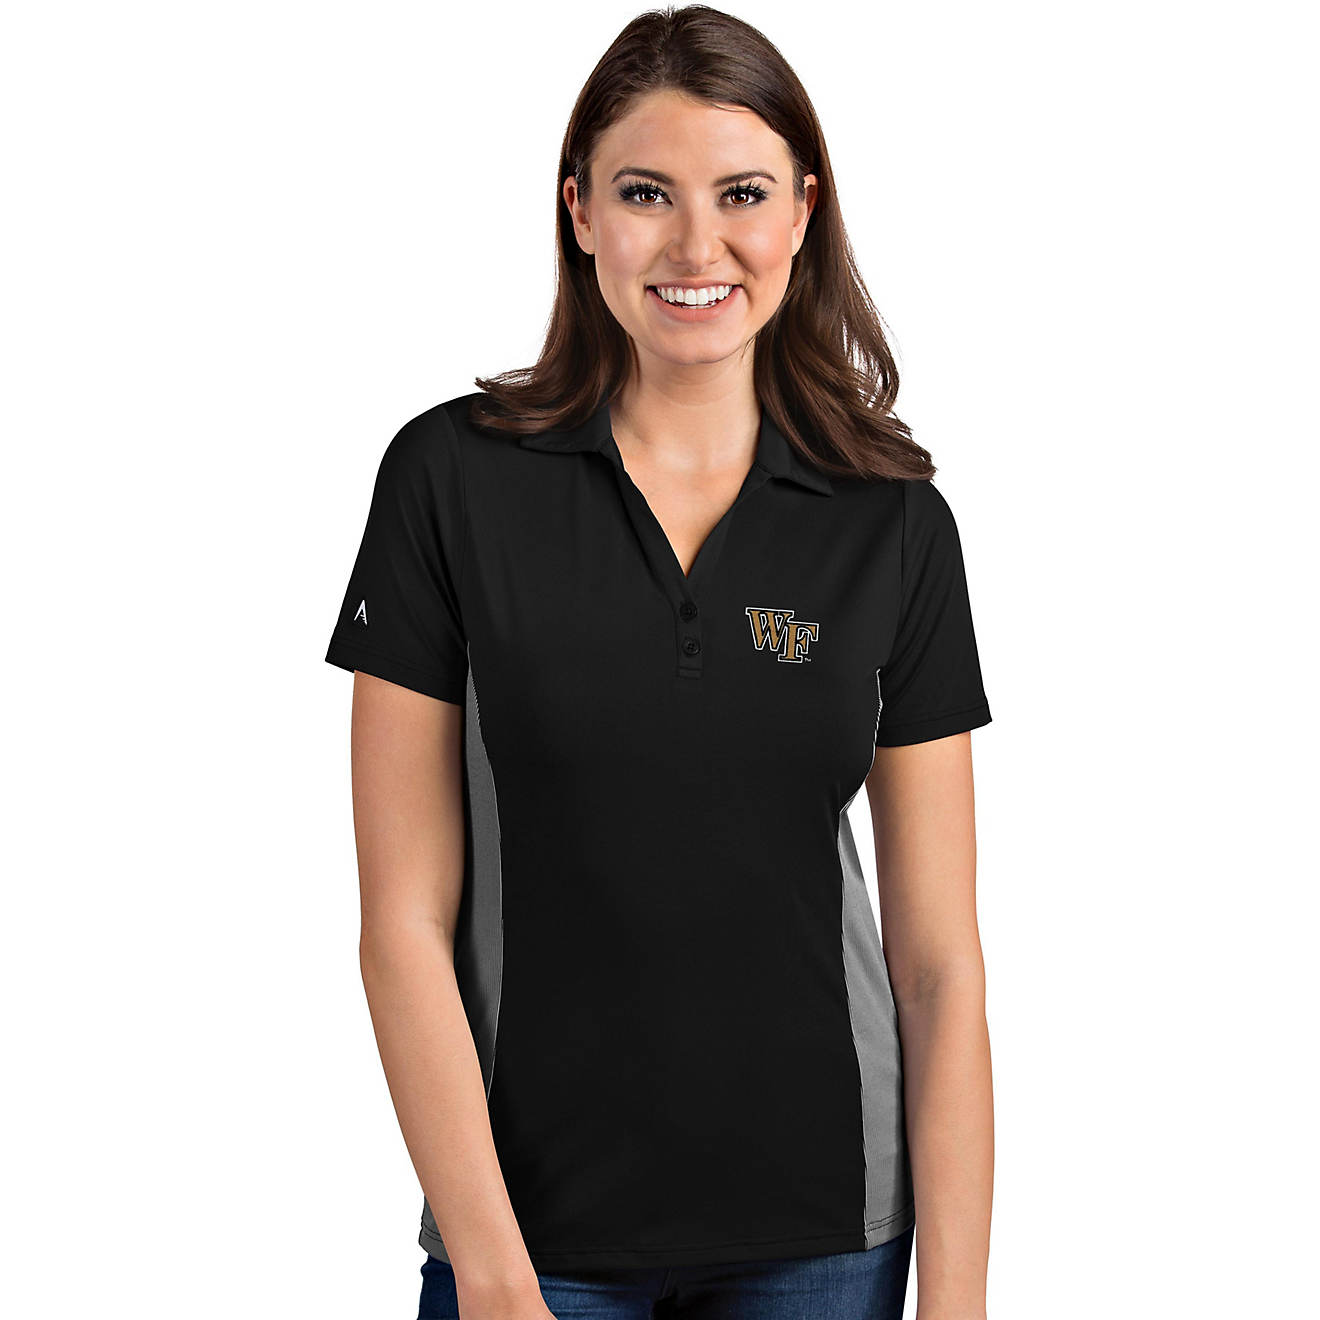 Antigua Women's Wake Forest University Venture Polo Shirt                                                                        - view number 1